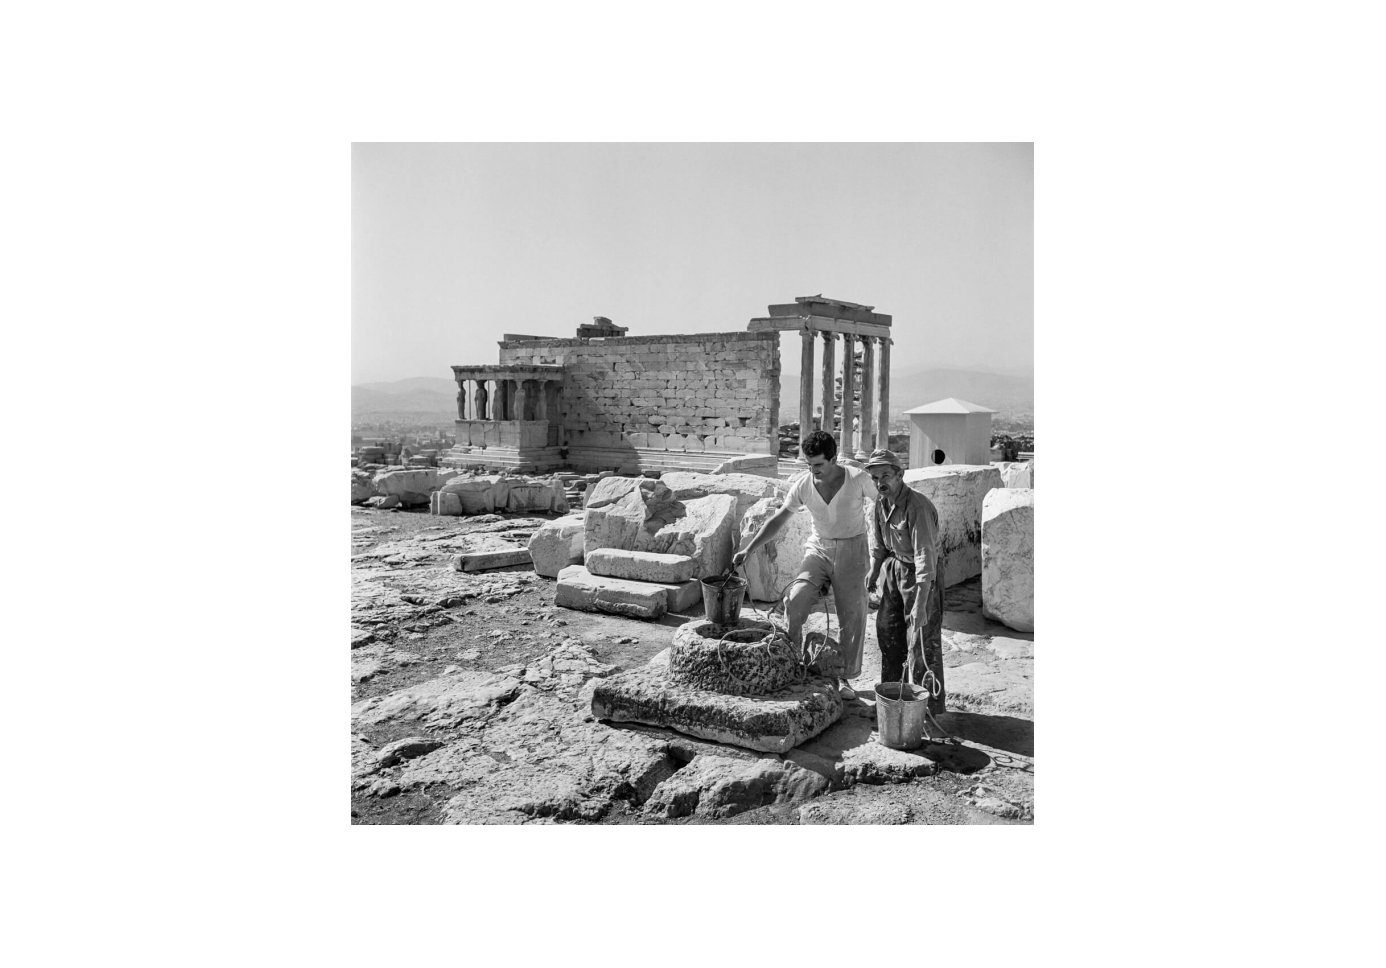 Two men drawing water from a cistern at the Acropolis. Photo by Robert McCabe.